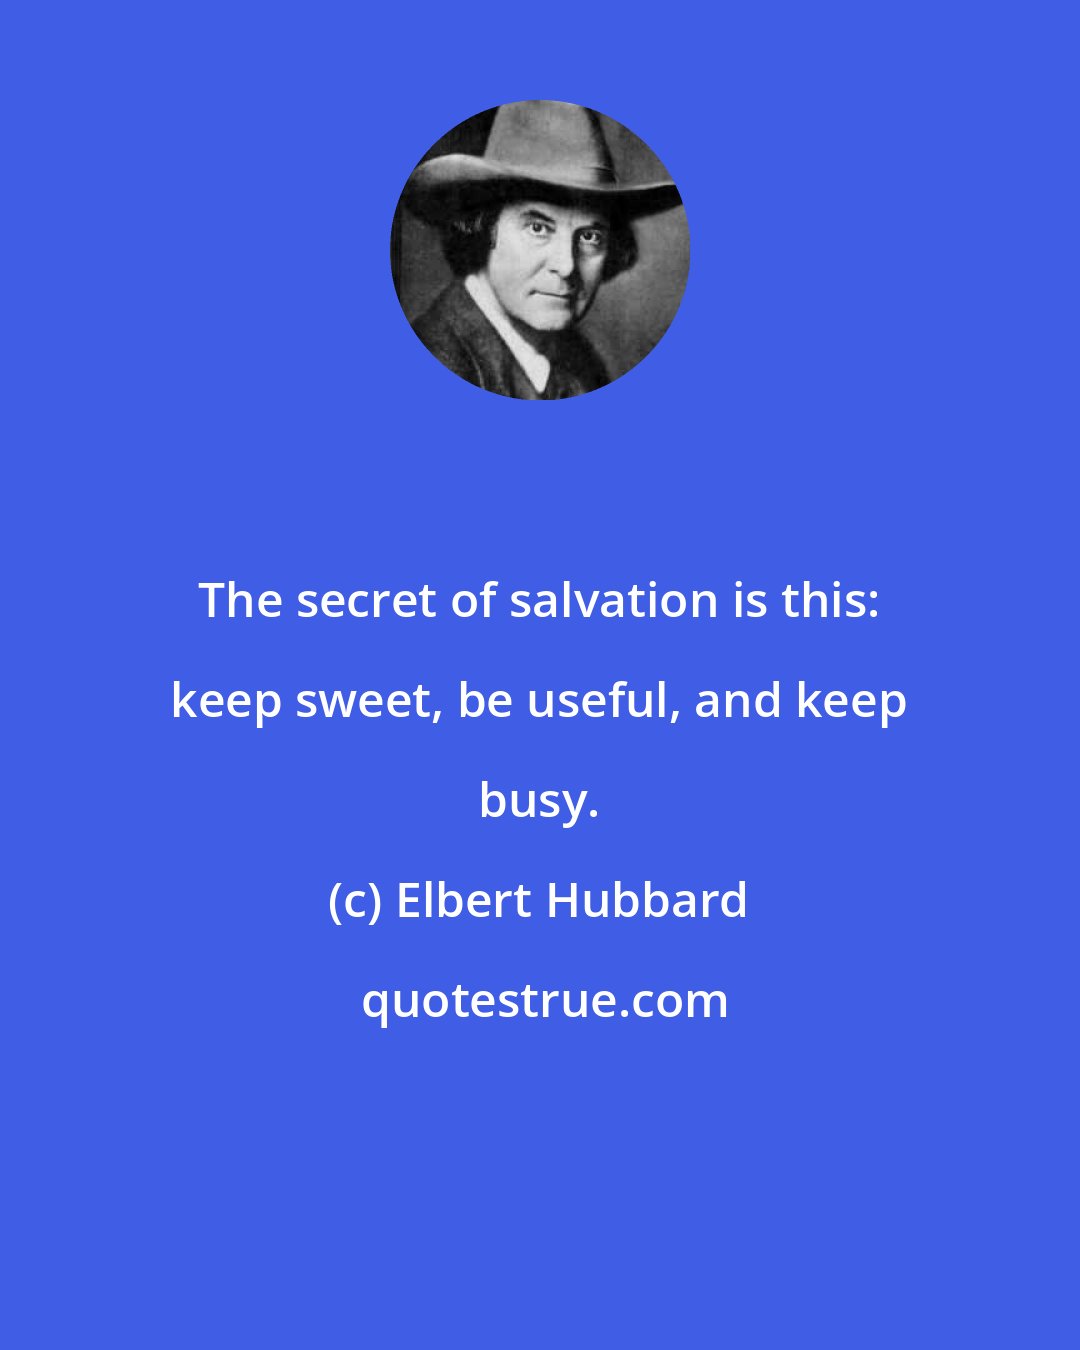 Elbert Hubbard: The secret of salvation is this: keep sweet, be useful, and keep busy.